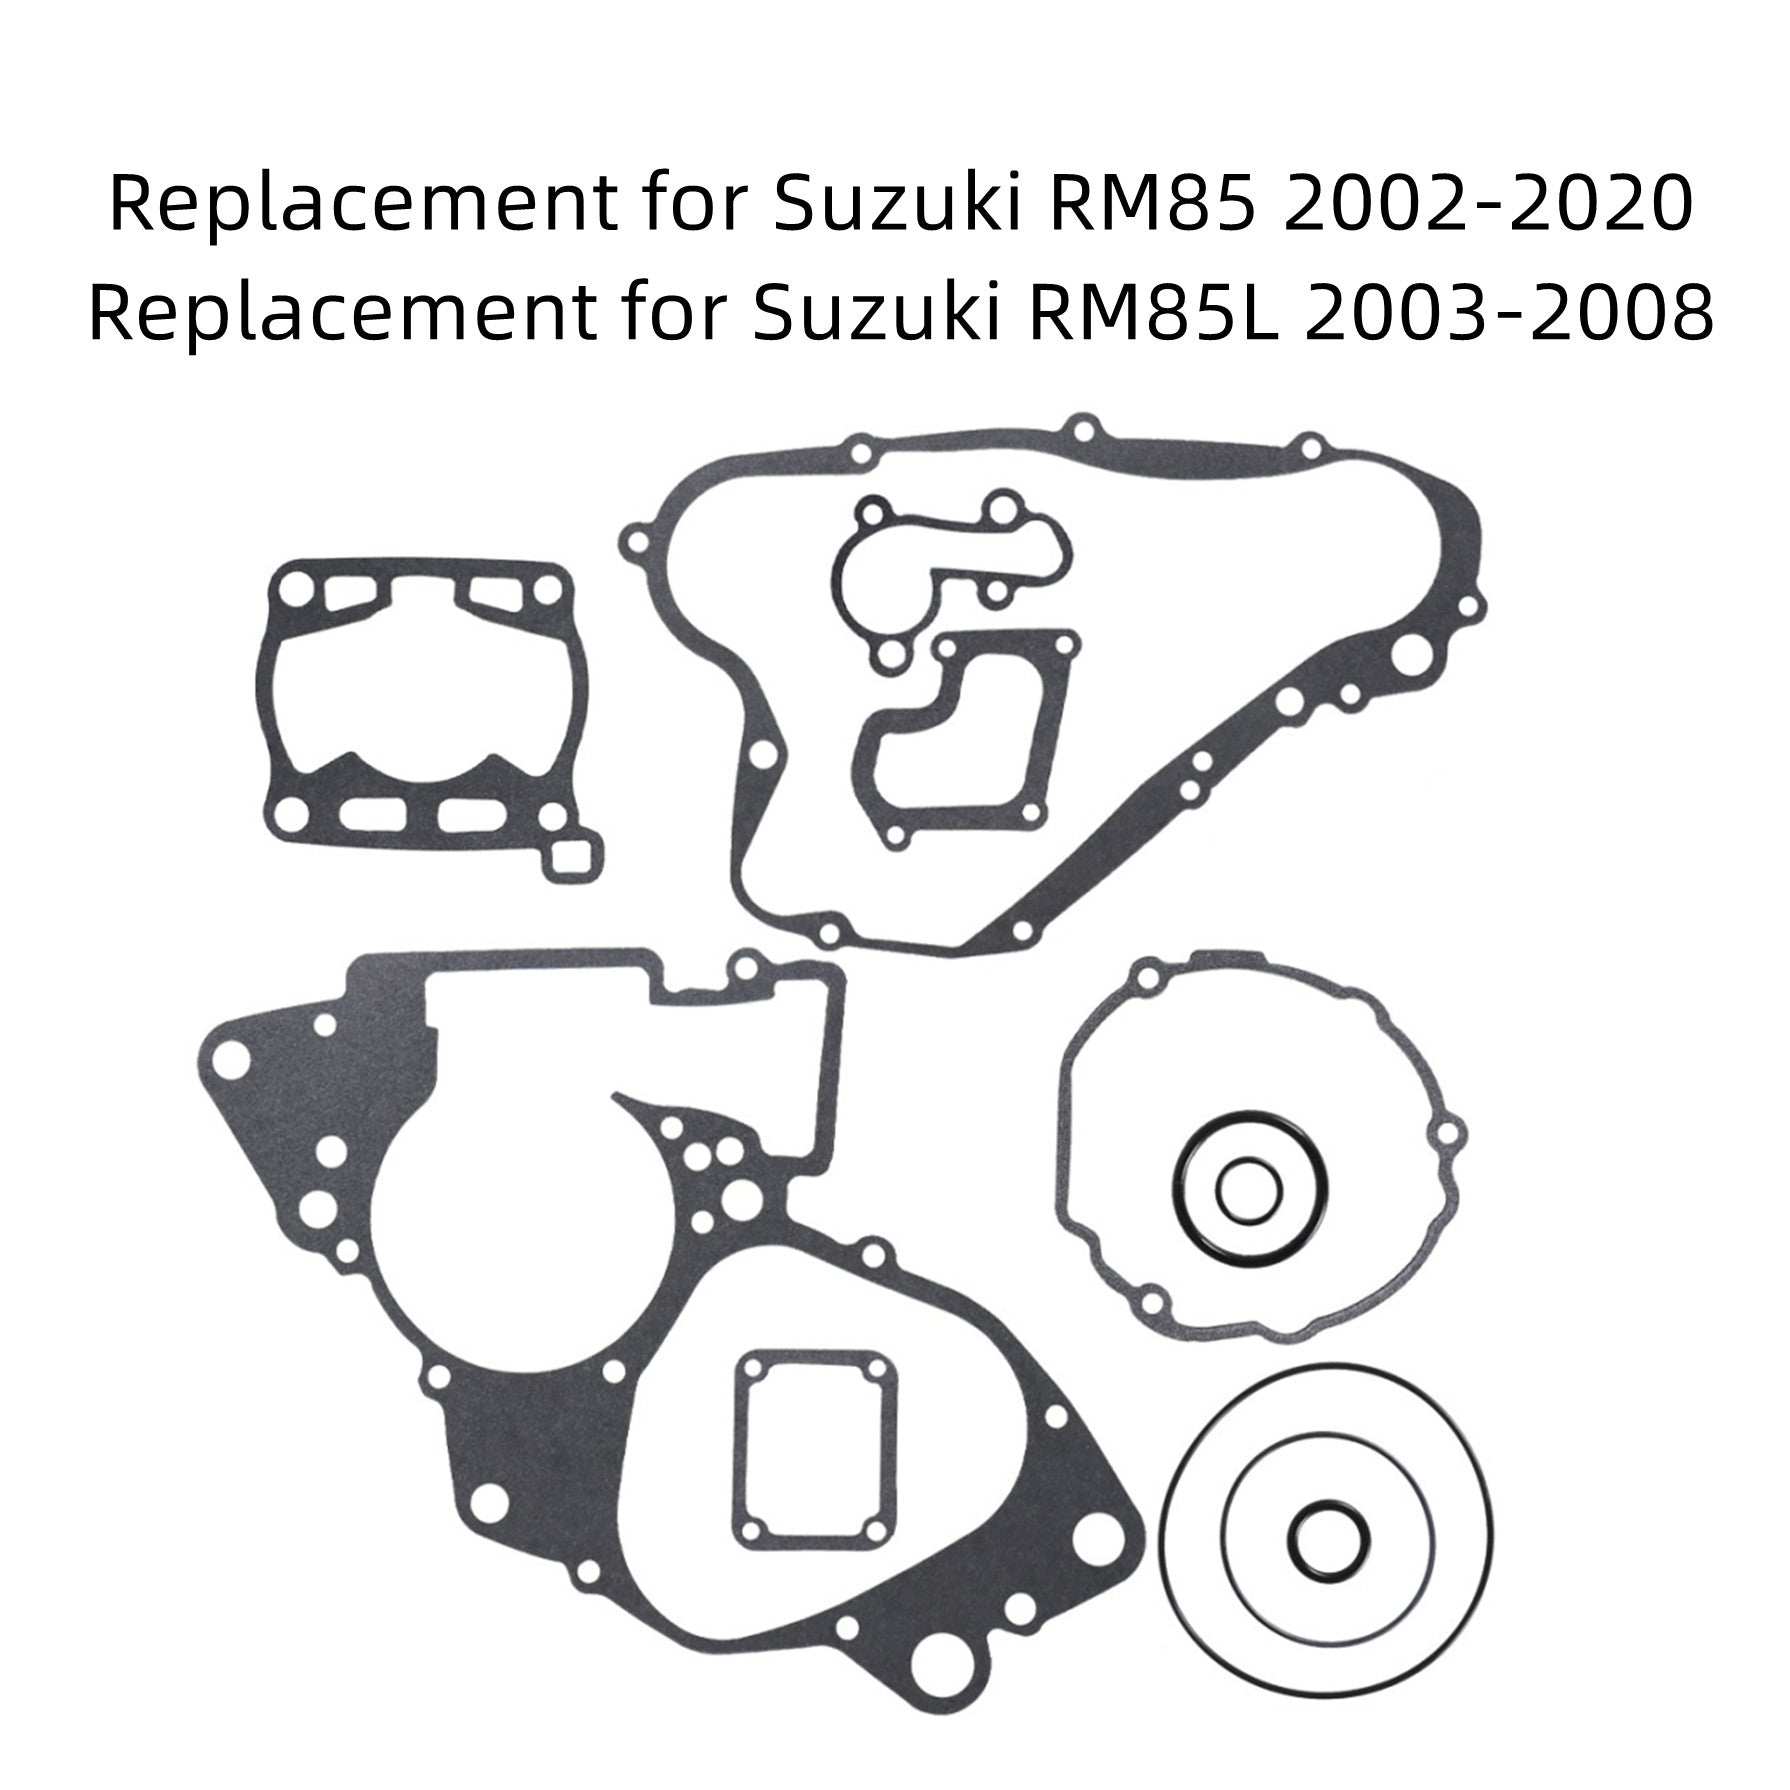 labwork Complete Gasket Kit Top & Bottom End Engine Set Replacement for Suzuki RM85 2002-2020